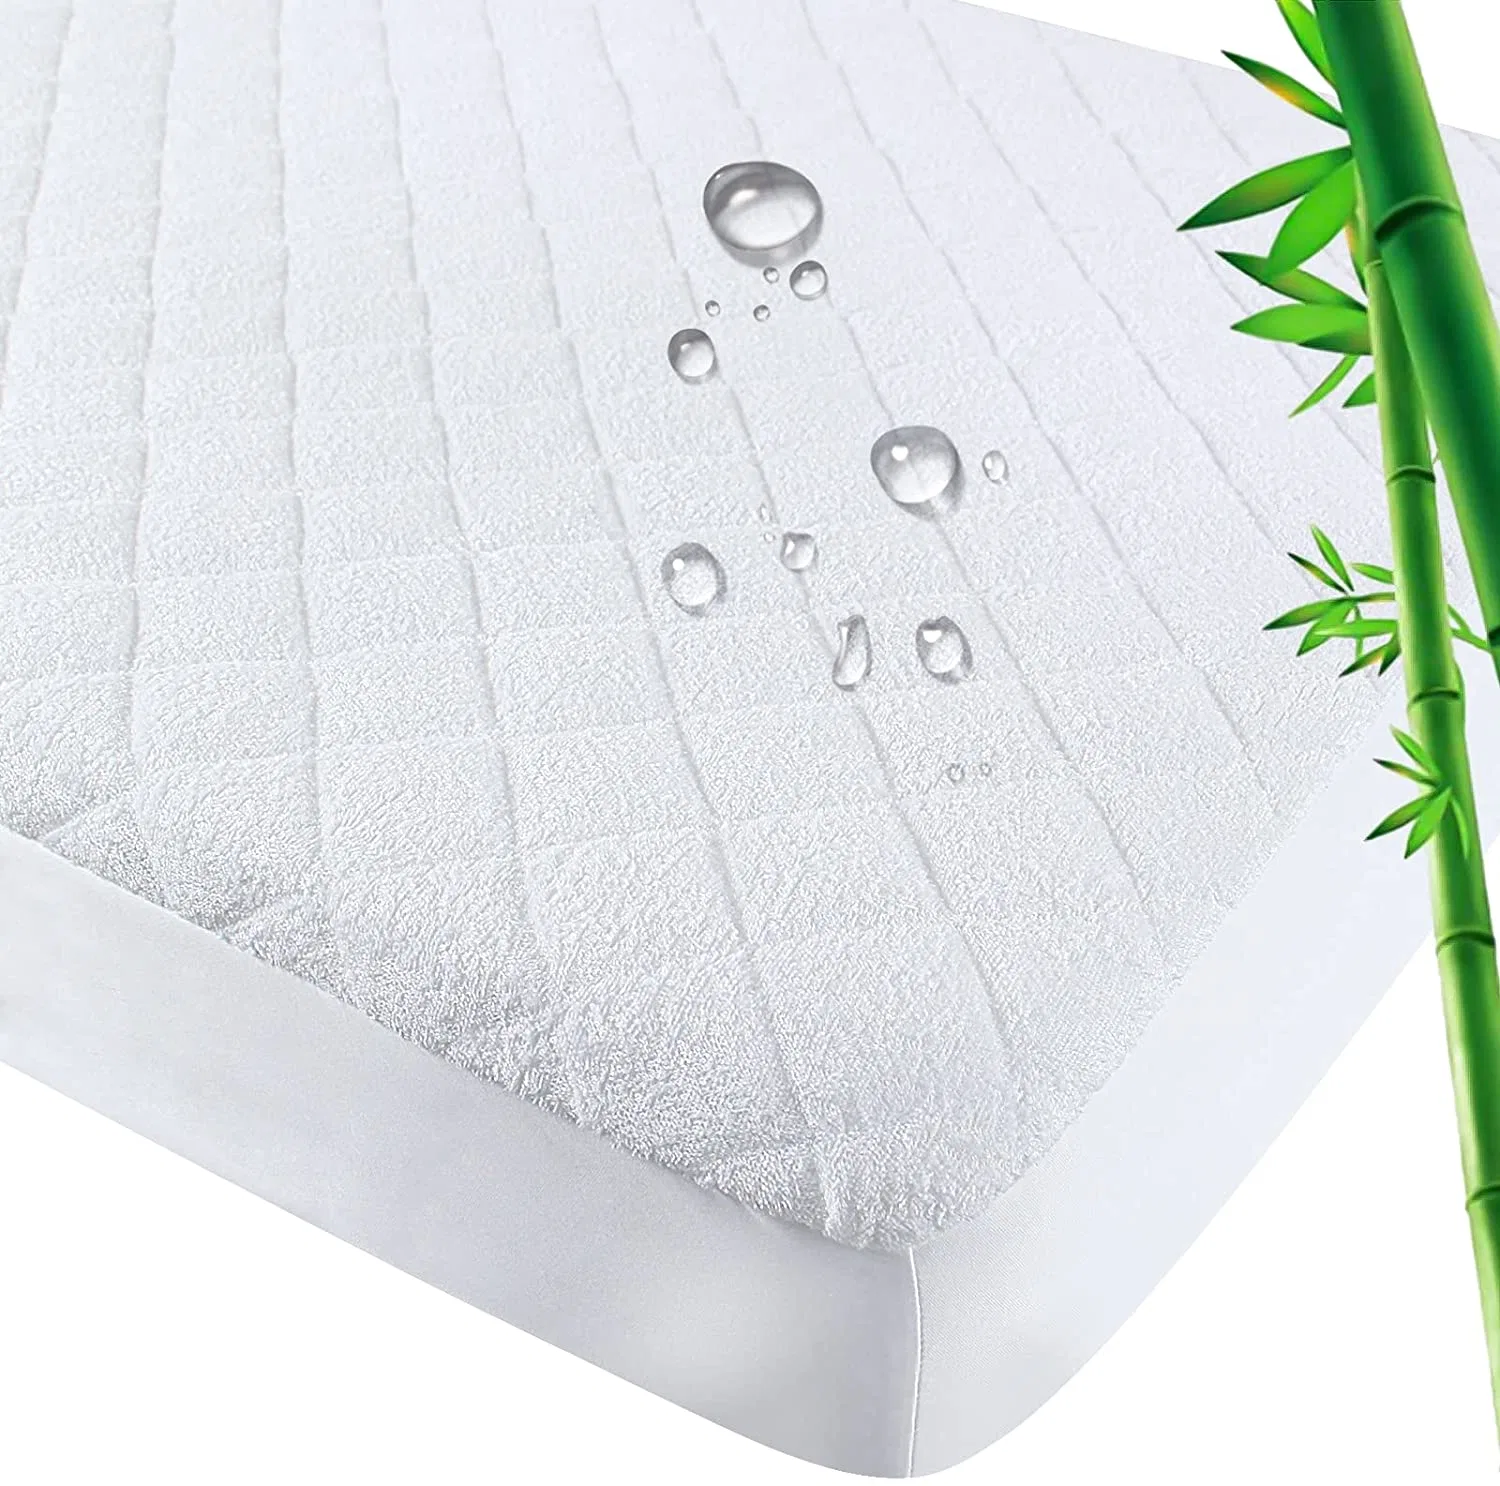 Waterproof Pad Cover Breathable Ultra Soft Cotton Toddler Crib Mattress Pad